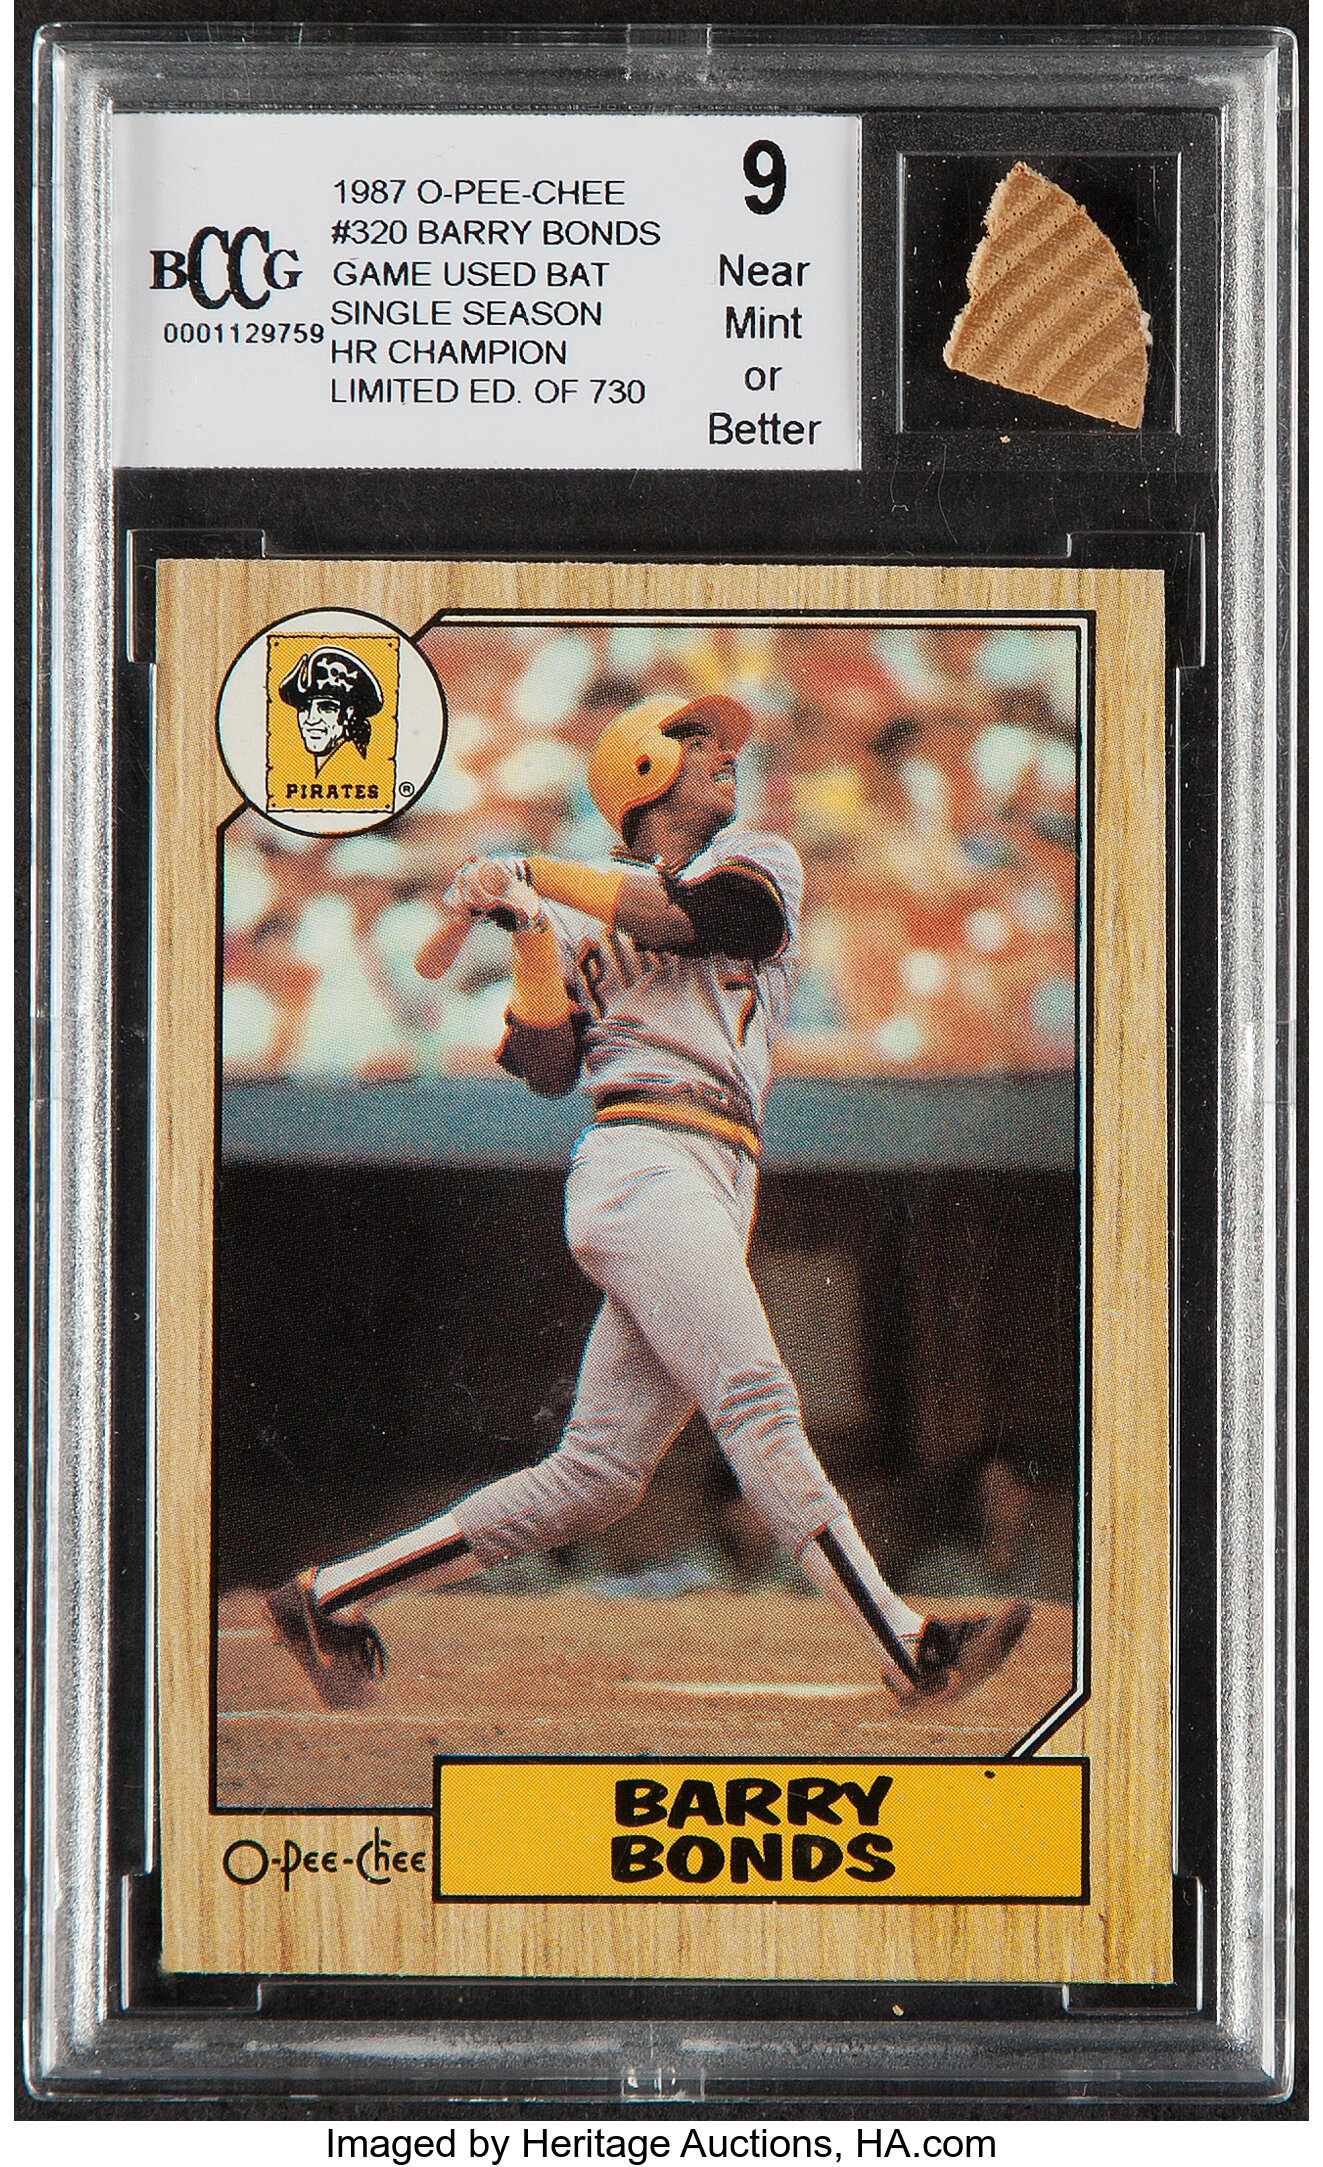 Barry Bonds- Sports Card and Sports Memorabilia Auctions